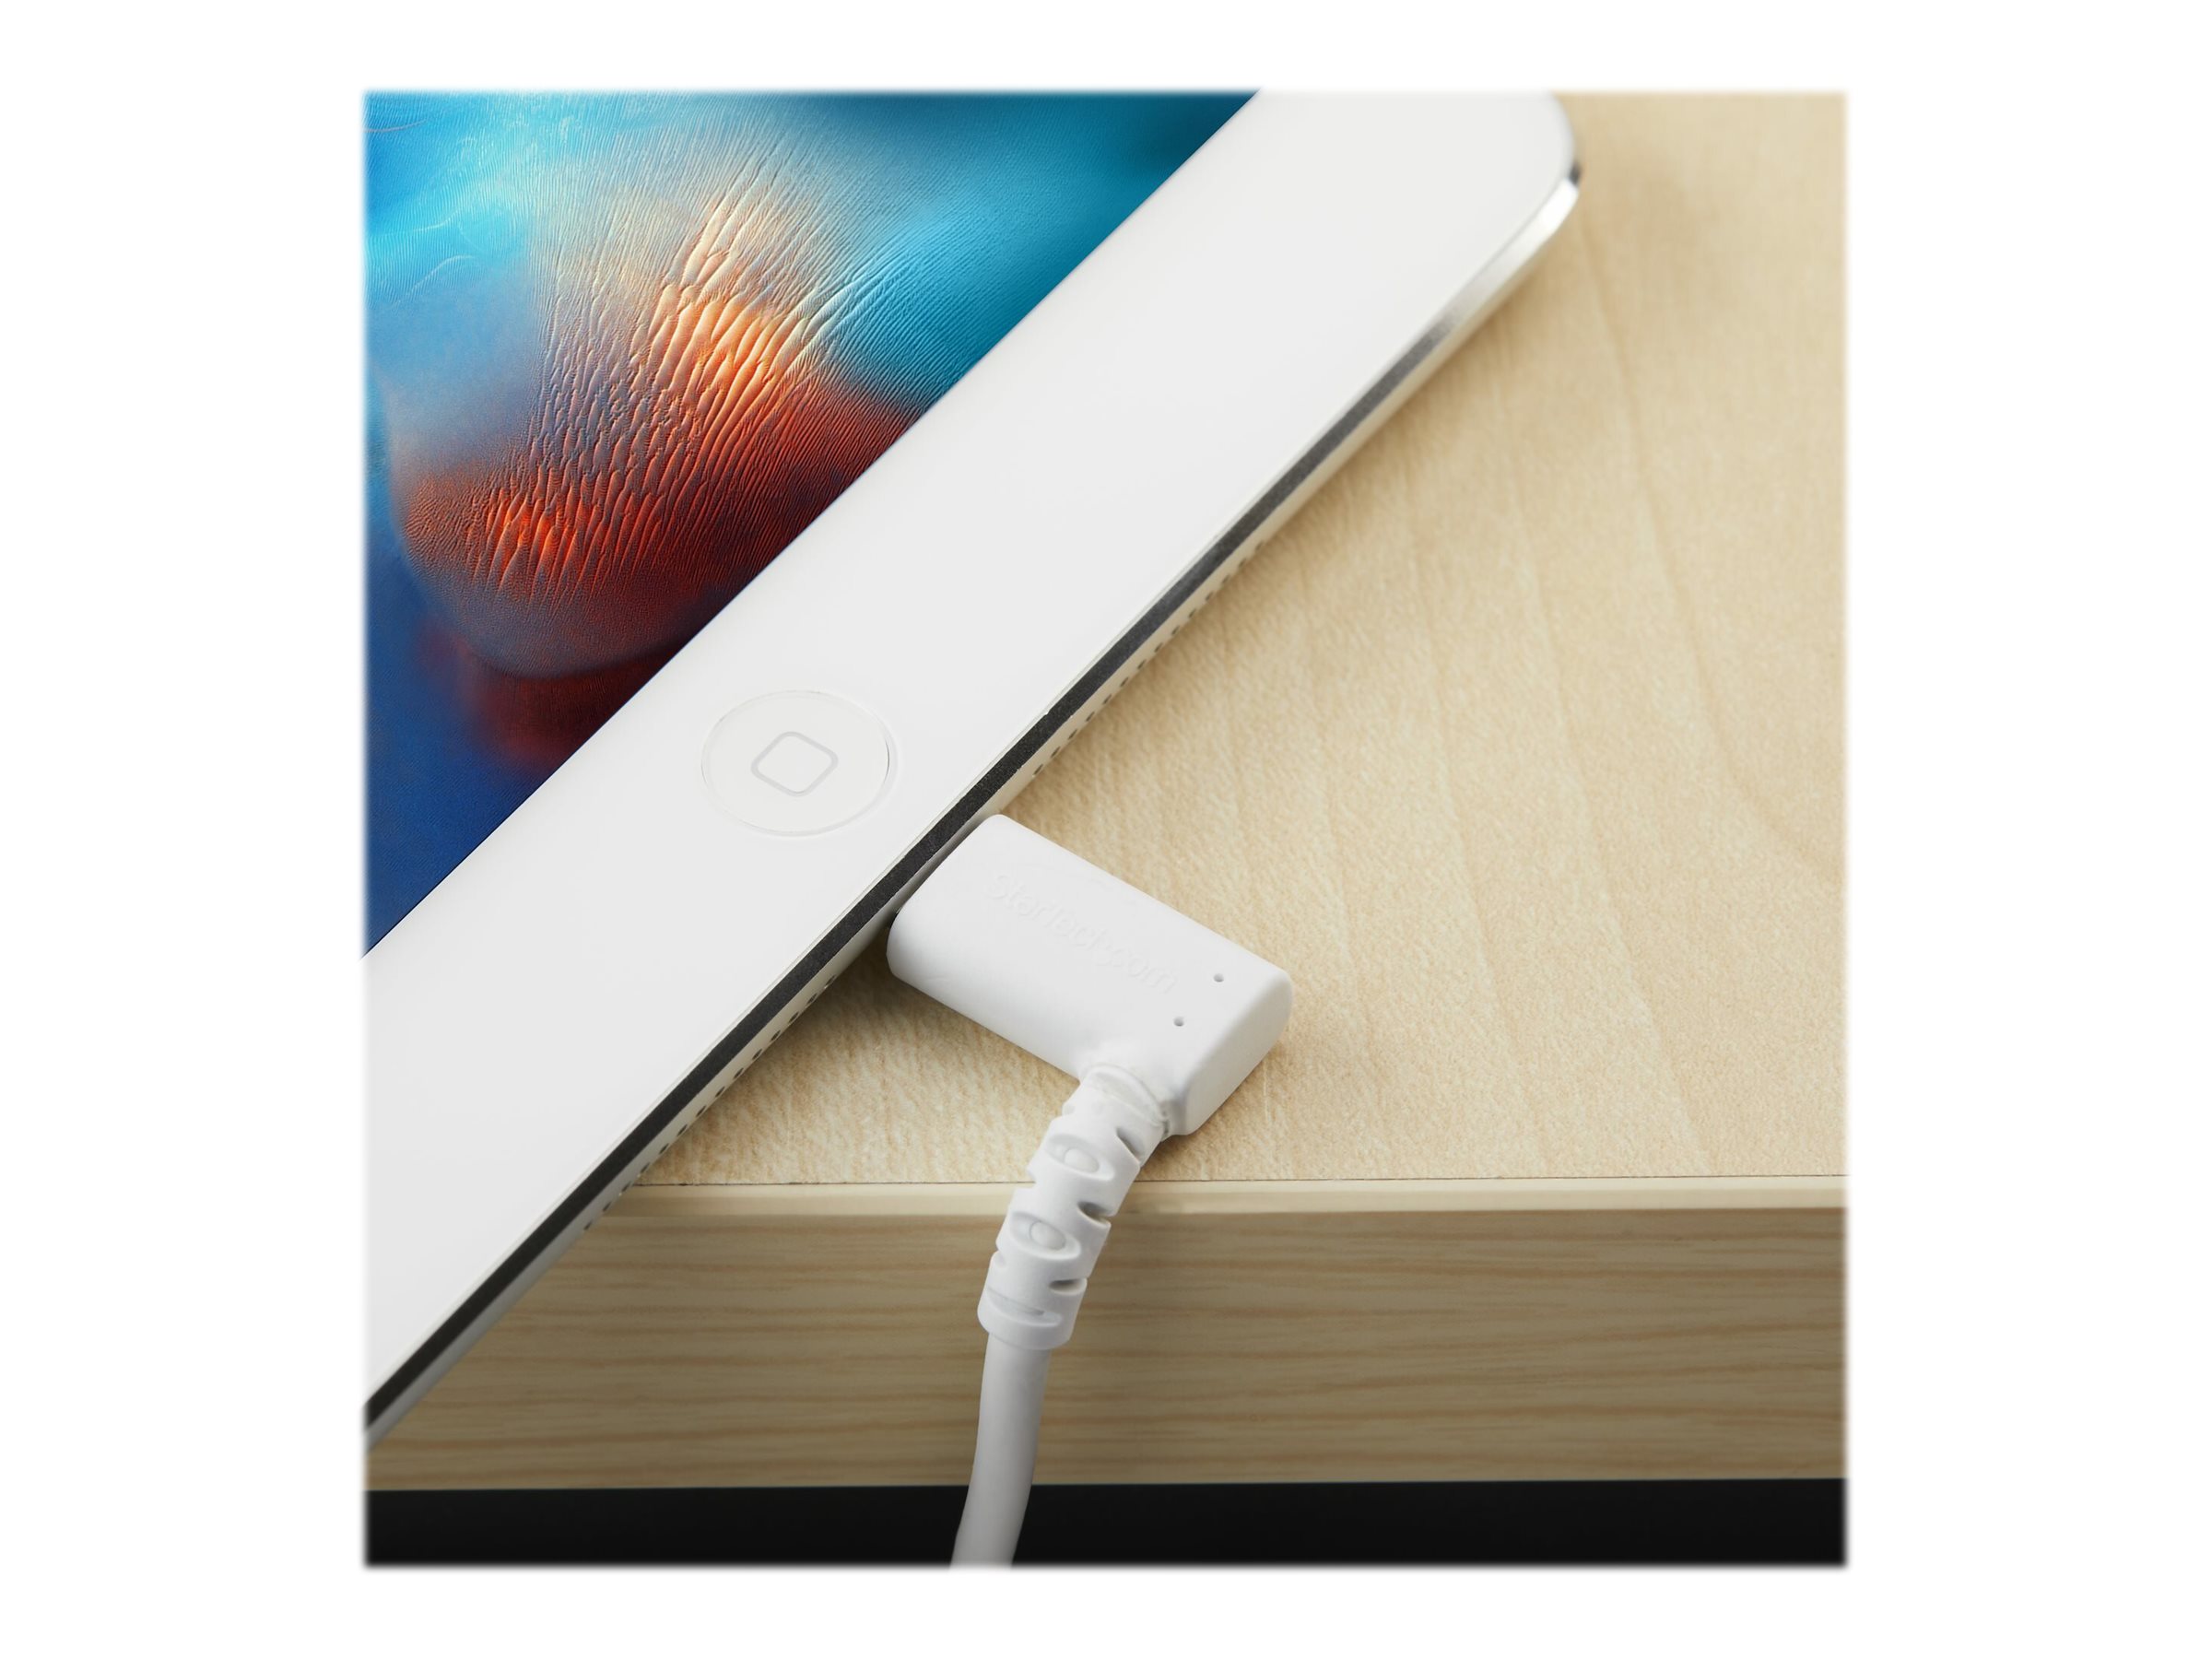 1m/3ft Durable USB-C to Lightning Cable - Lightning Cables